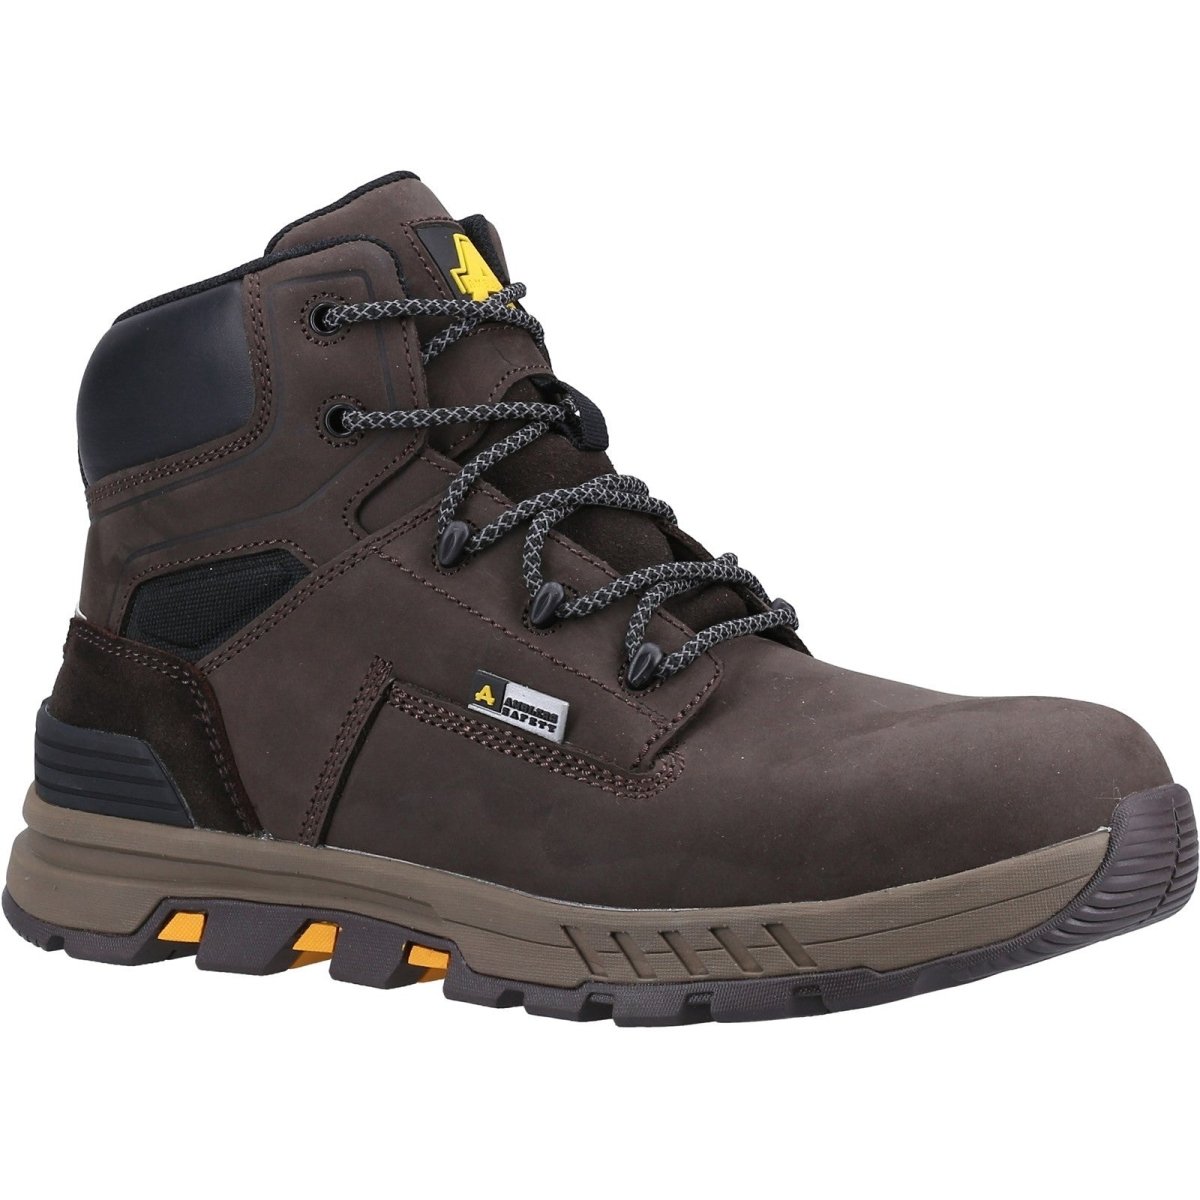 Amblers AS261 Crane Mens Composite Toe & Midsole Work Safety Boots - Shoe Store Direct